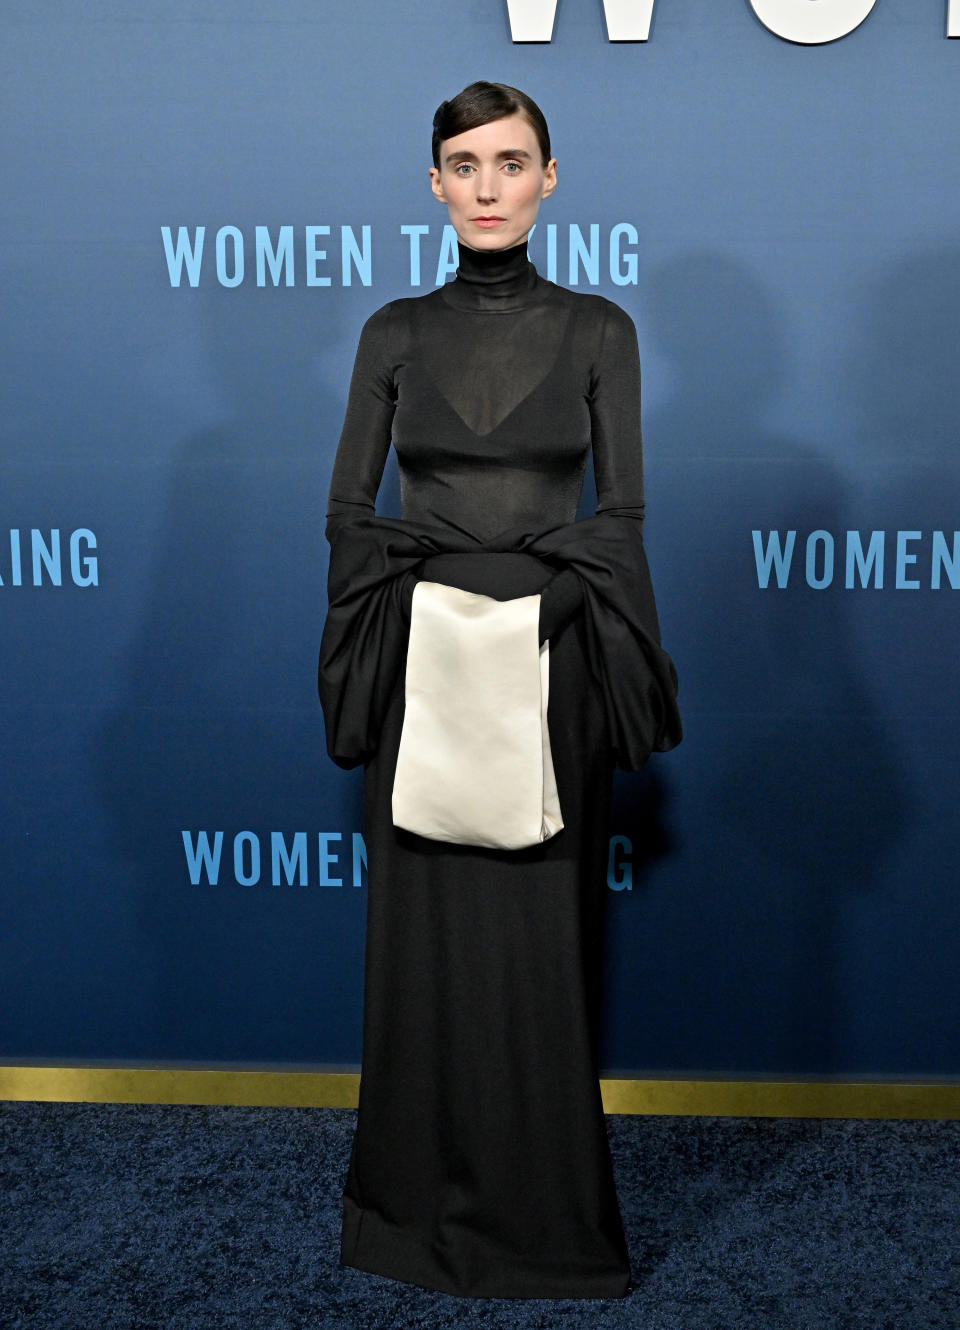 Rooney wears a long-sleeved turtleneck dress on the red carpet for an event